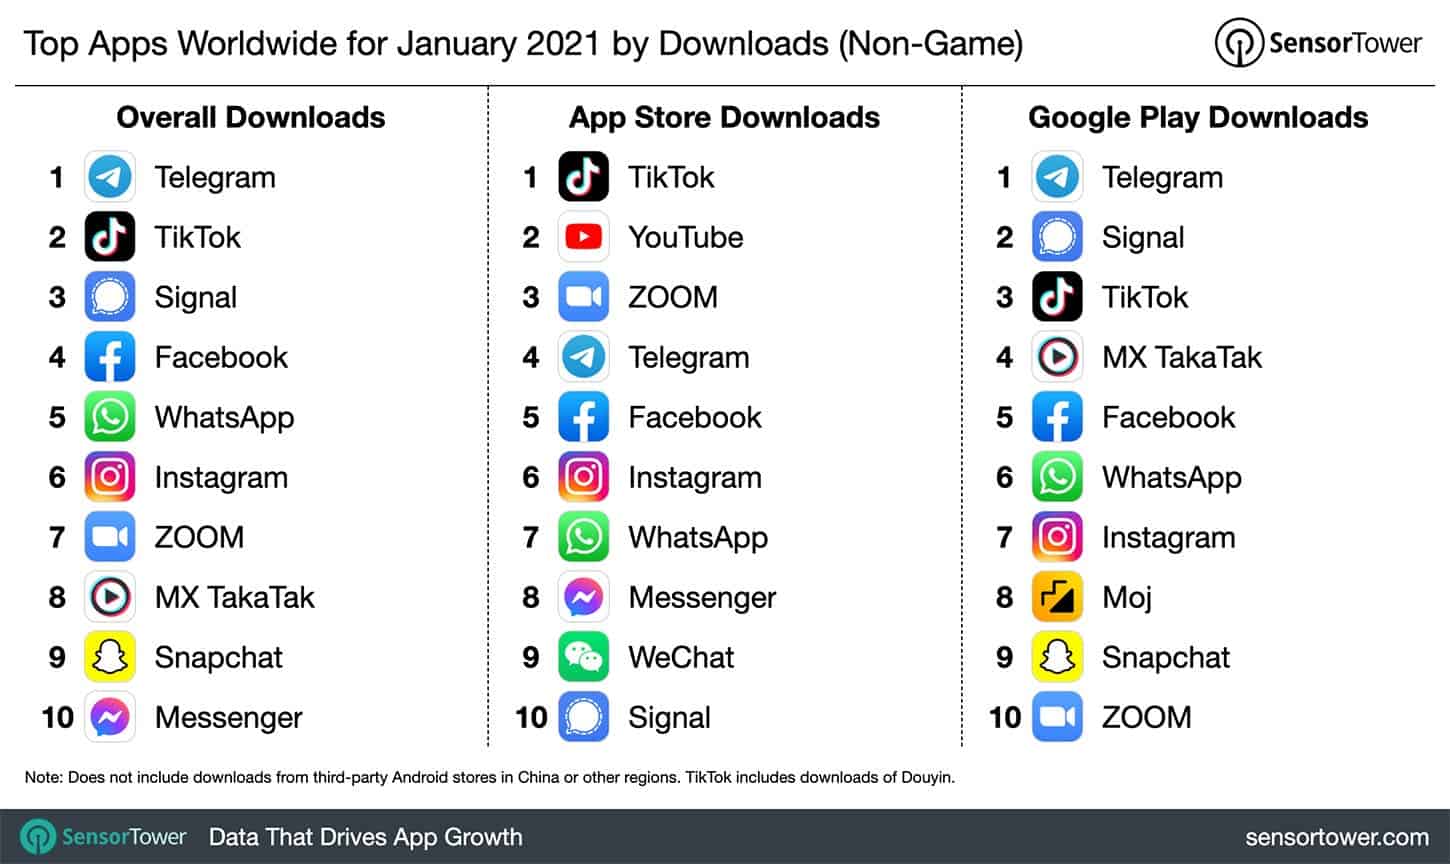 The most downloaded applications in January